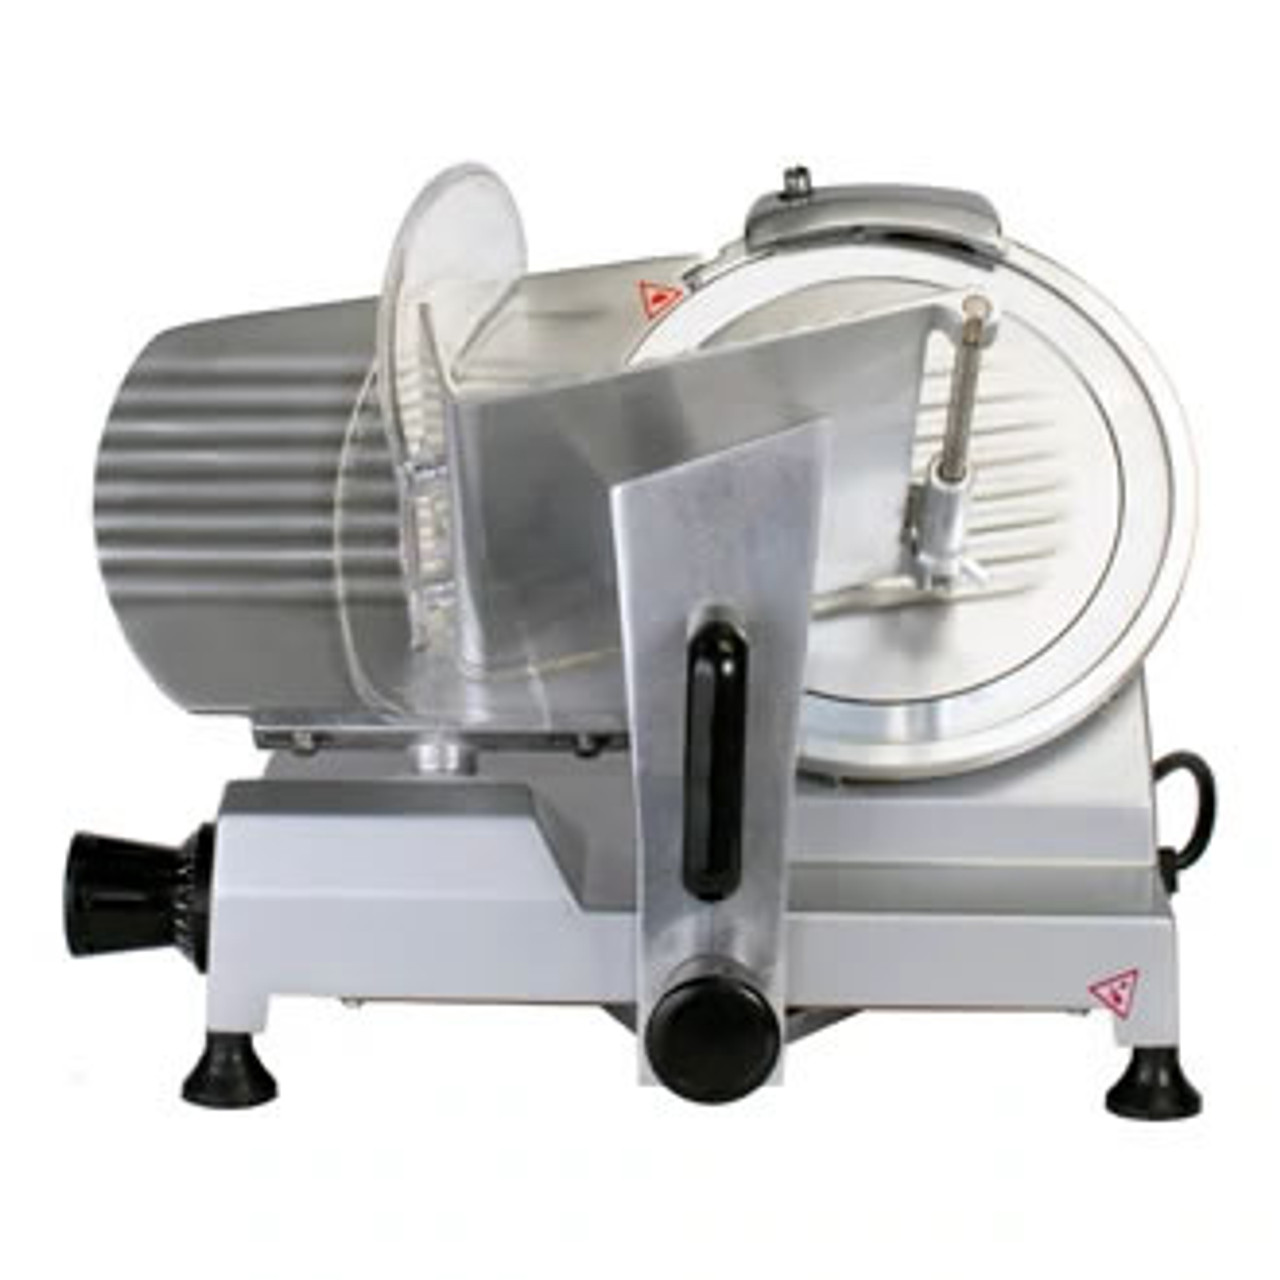 Manual Single-Support Jerky Slicer Charcoal Gray 